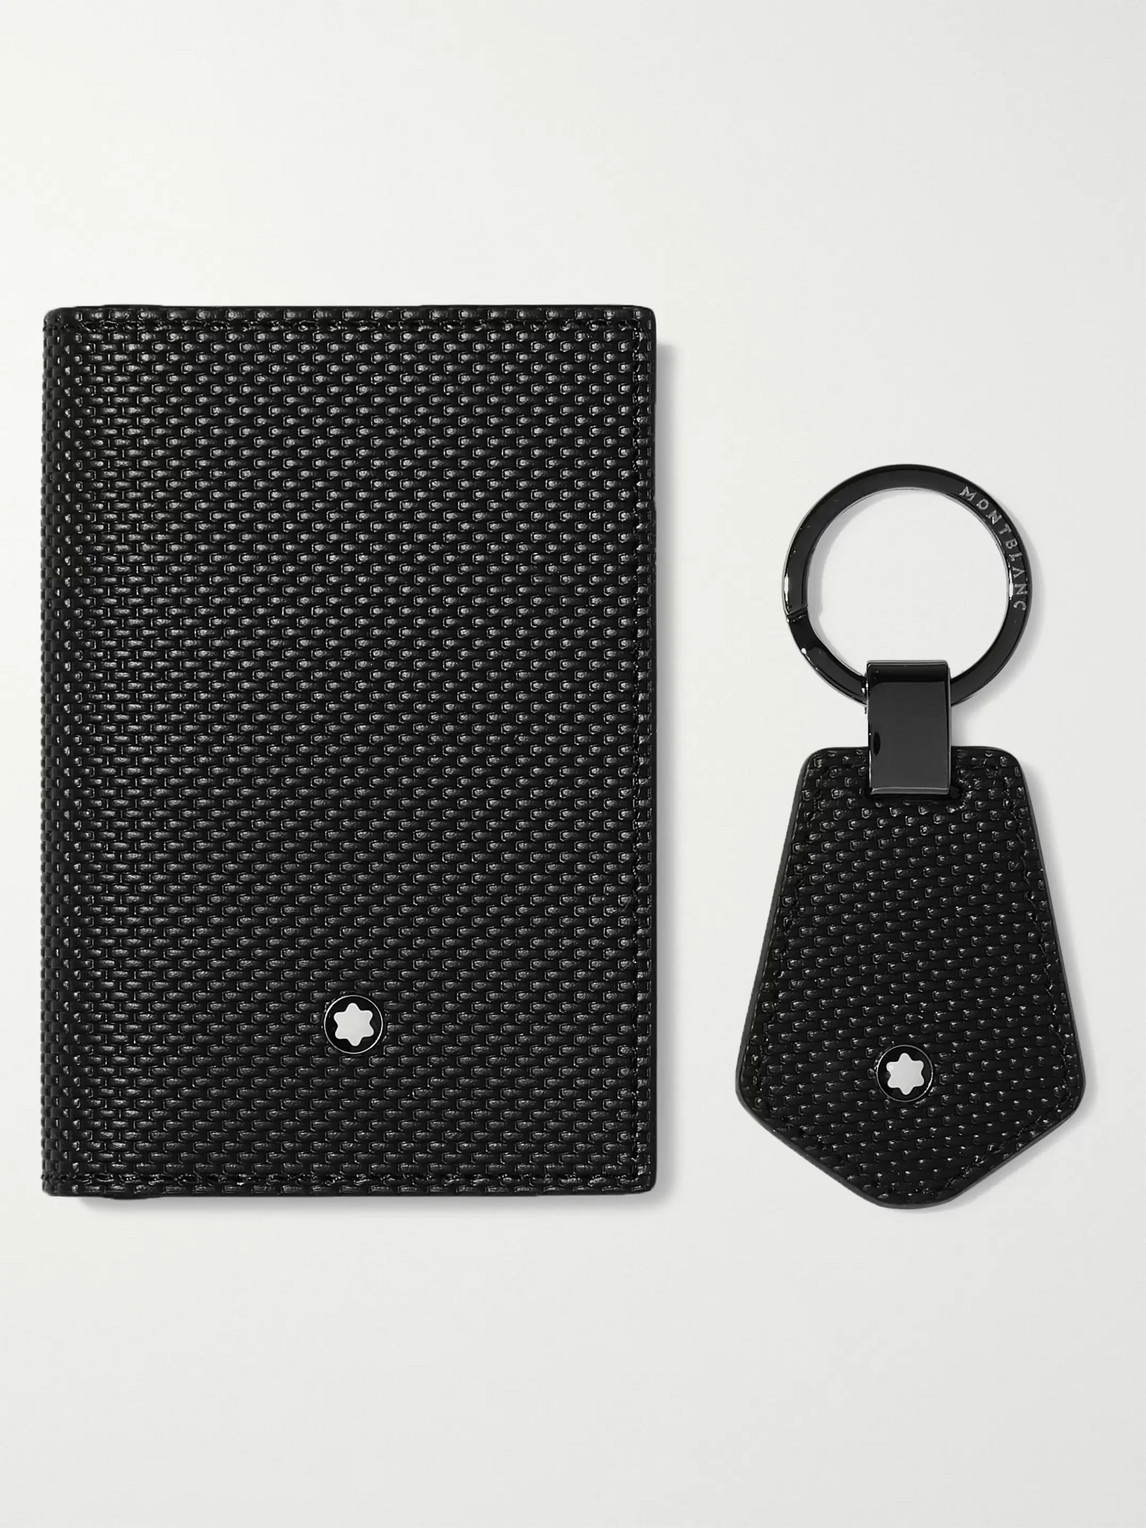 MONTBLANC WOVEN LEATHER BUSINESS CARDHOLDER AND KEY FOB GIFT SET